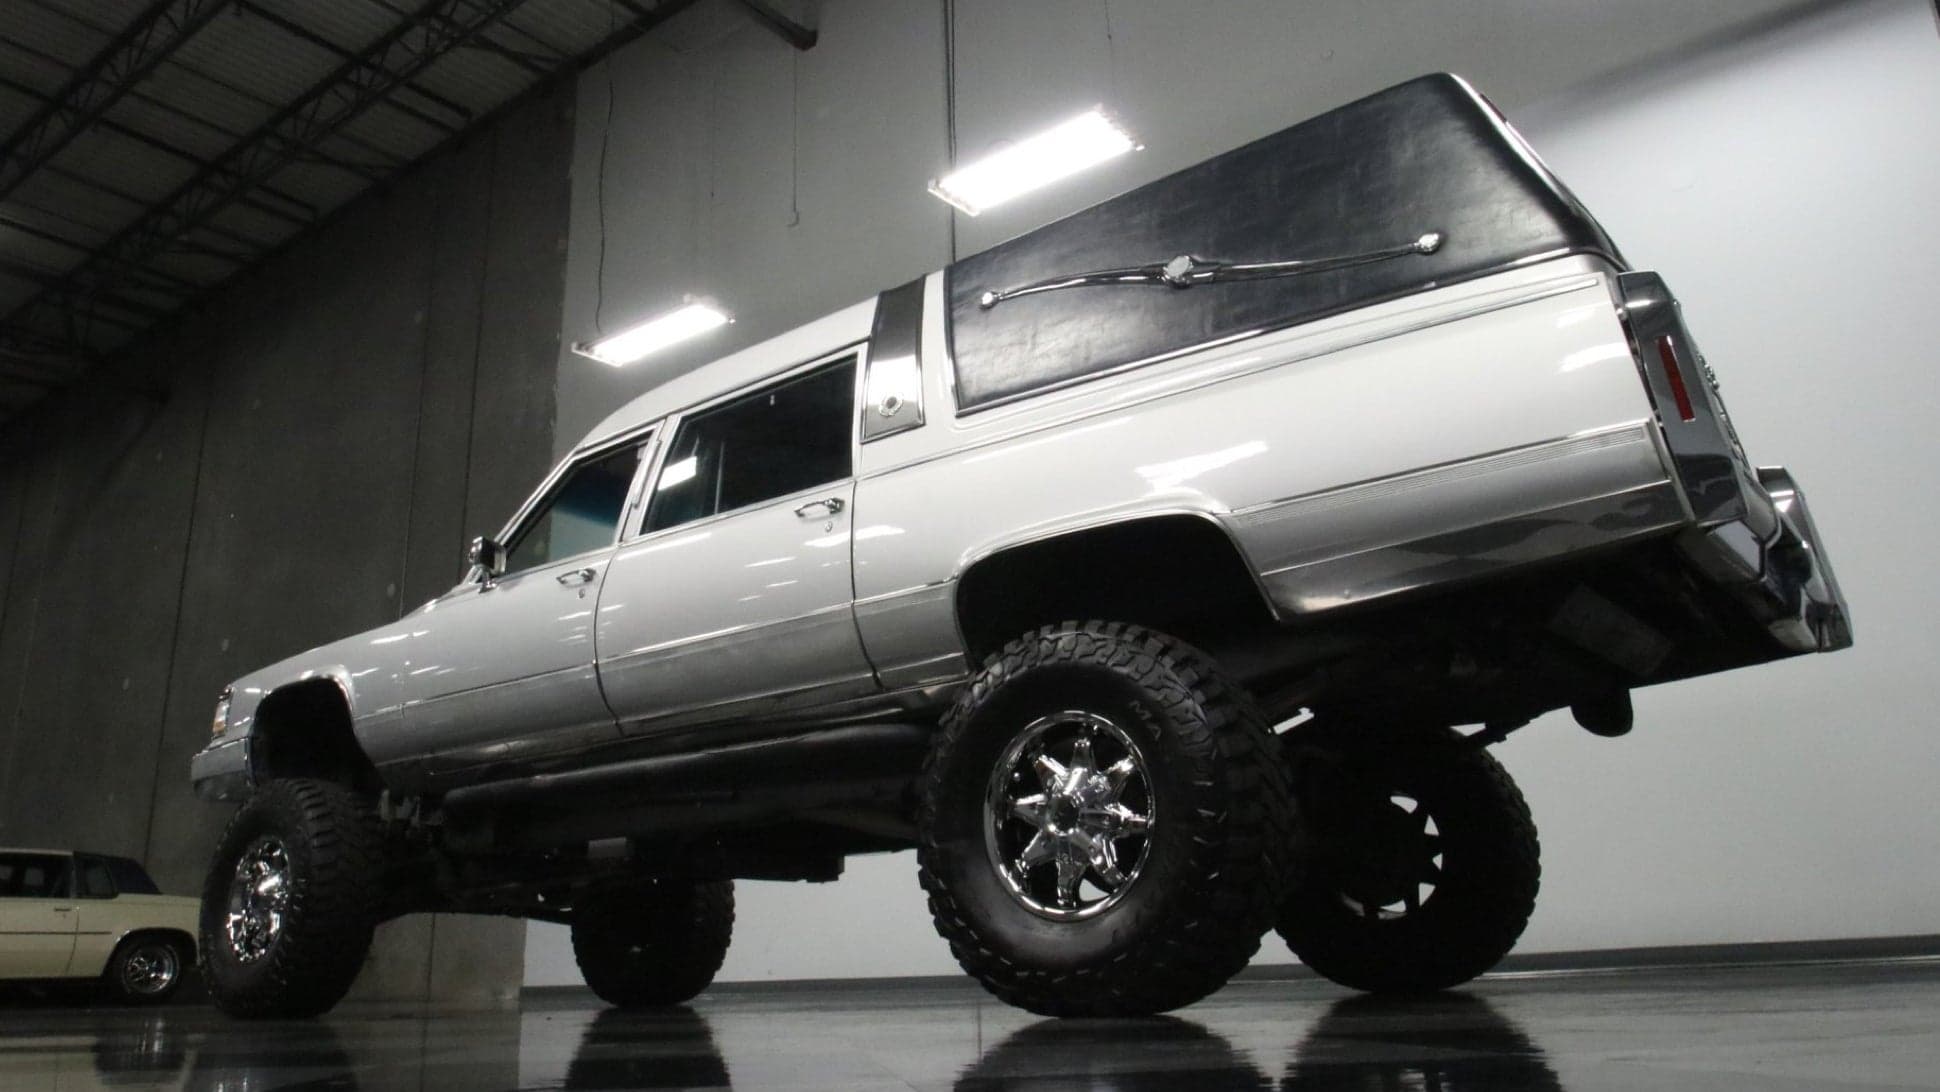 This Lifted Cadillac Hearse on a Chevy Truck Frame Is How I Want to Go Out